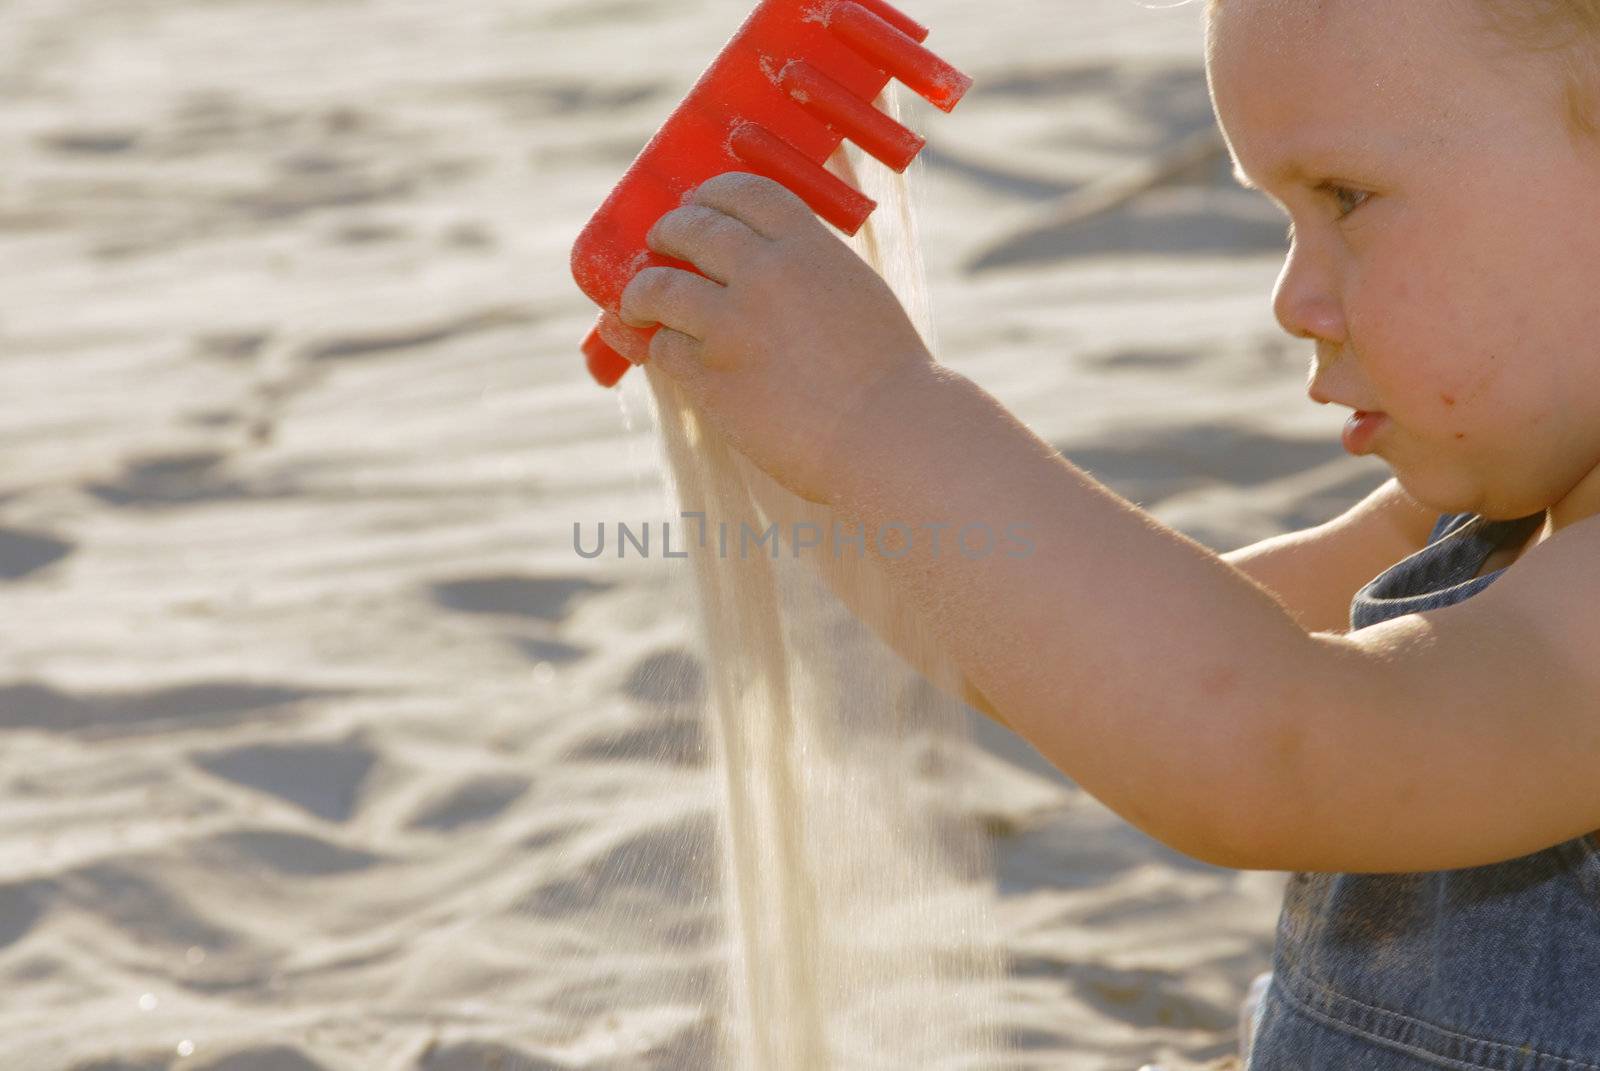 Baby girl playing on the beach with a red toy and sand. Close view